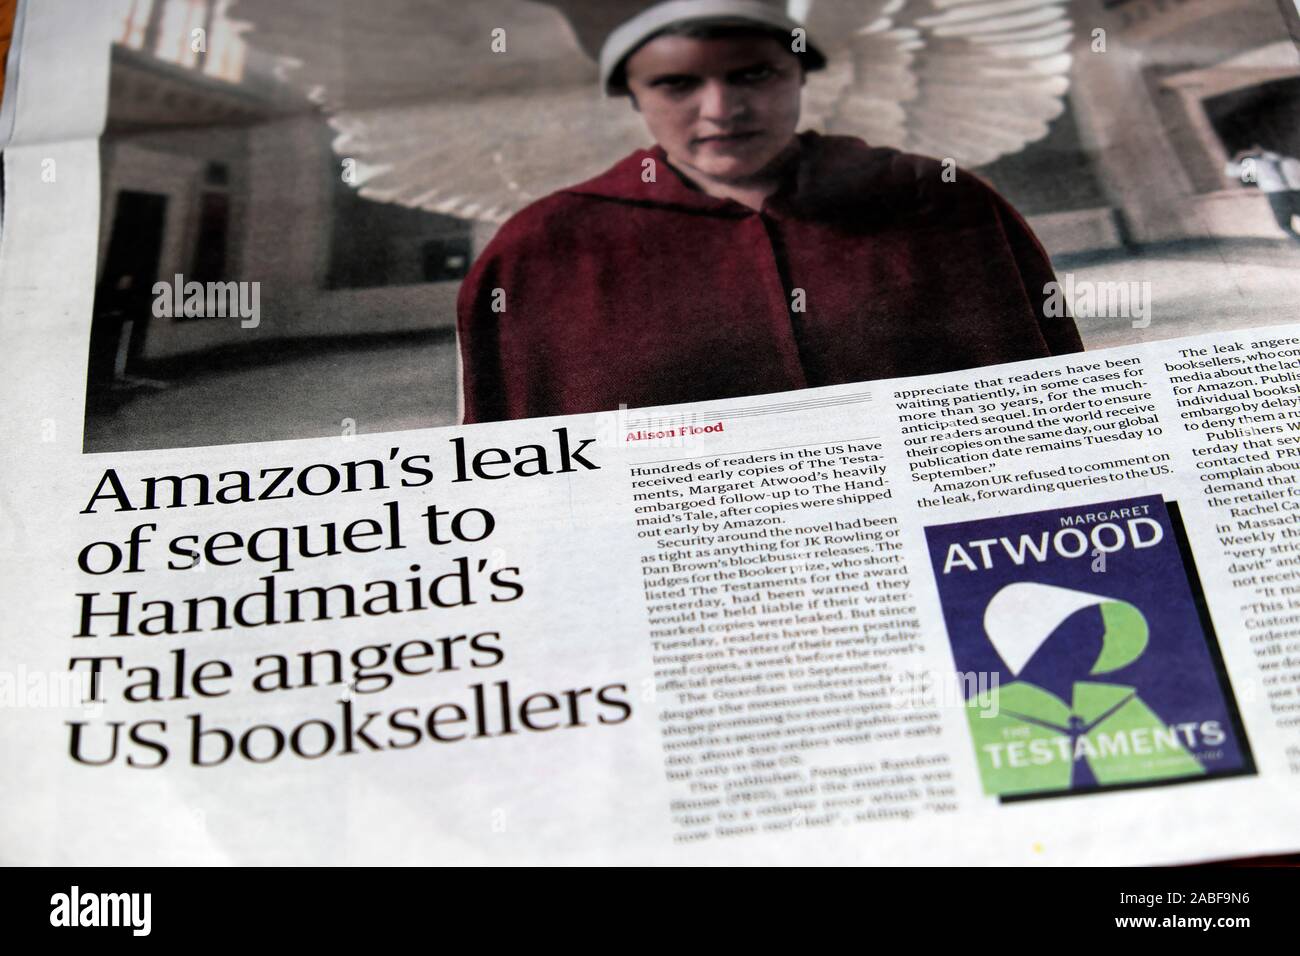 'Amazon's leak of sequel to Handmaid's Tale angers US booksellers' Margaret Atwood Guardian newspaper headline in September 2019 Stock Photo